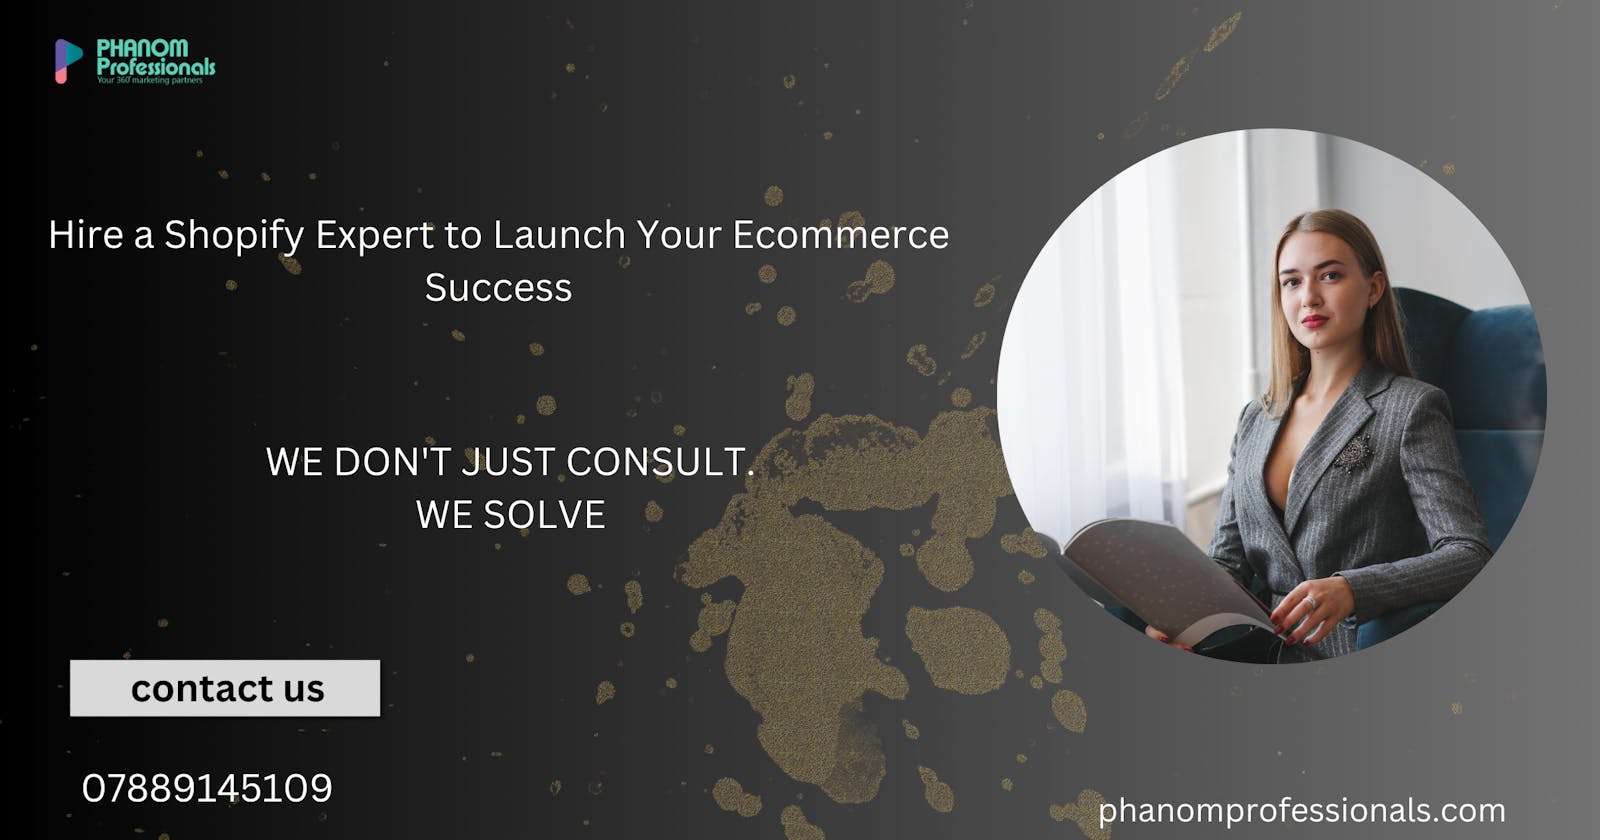 Hire a Shopify Expert to Launch Your Ecommerce Success